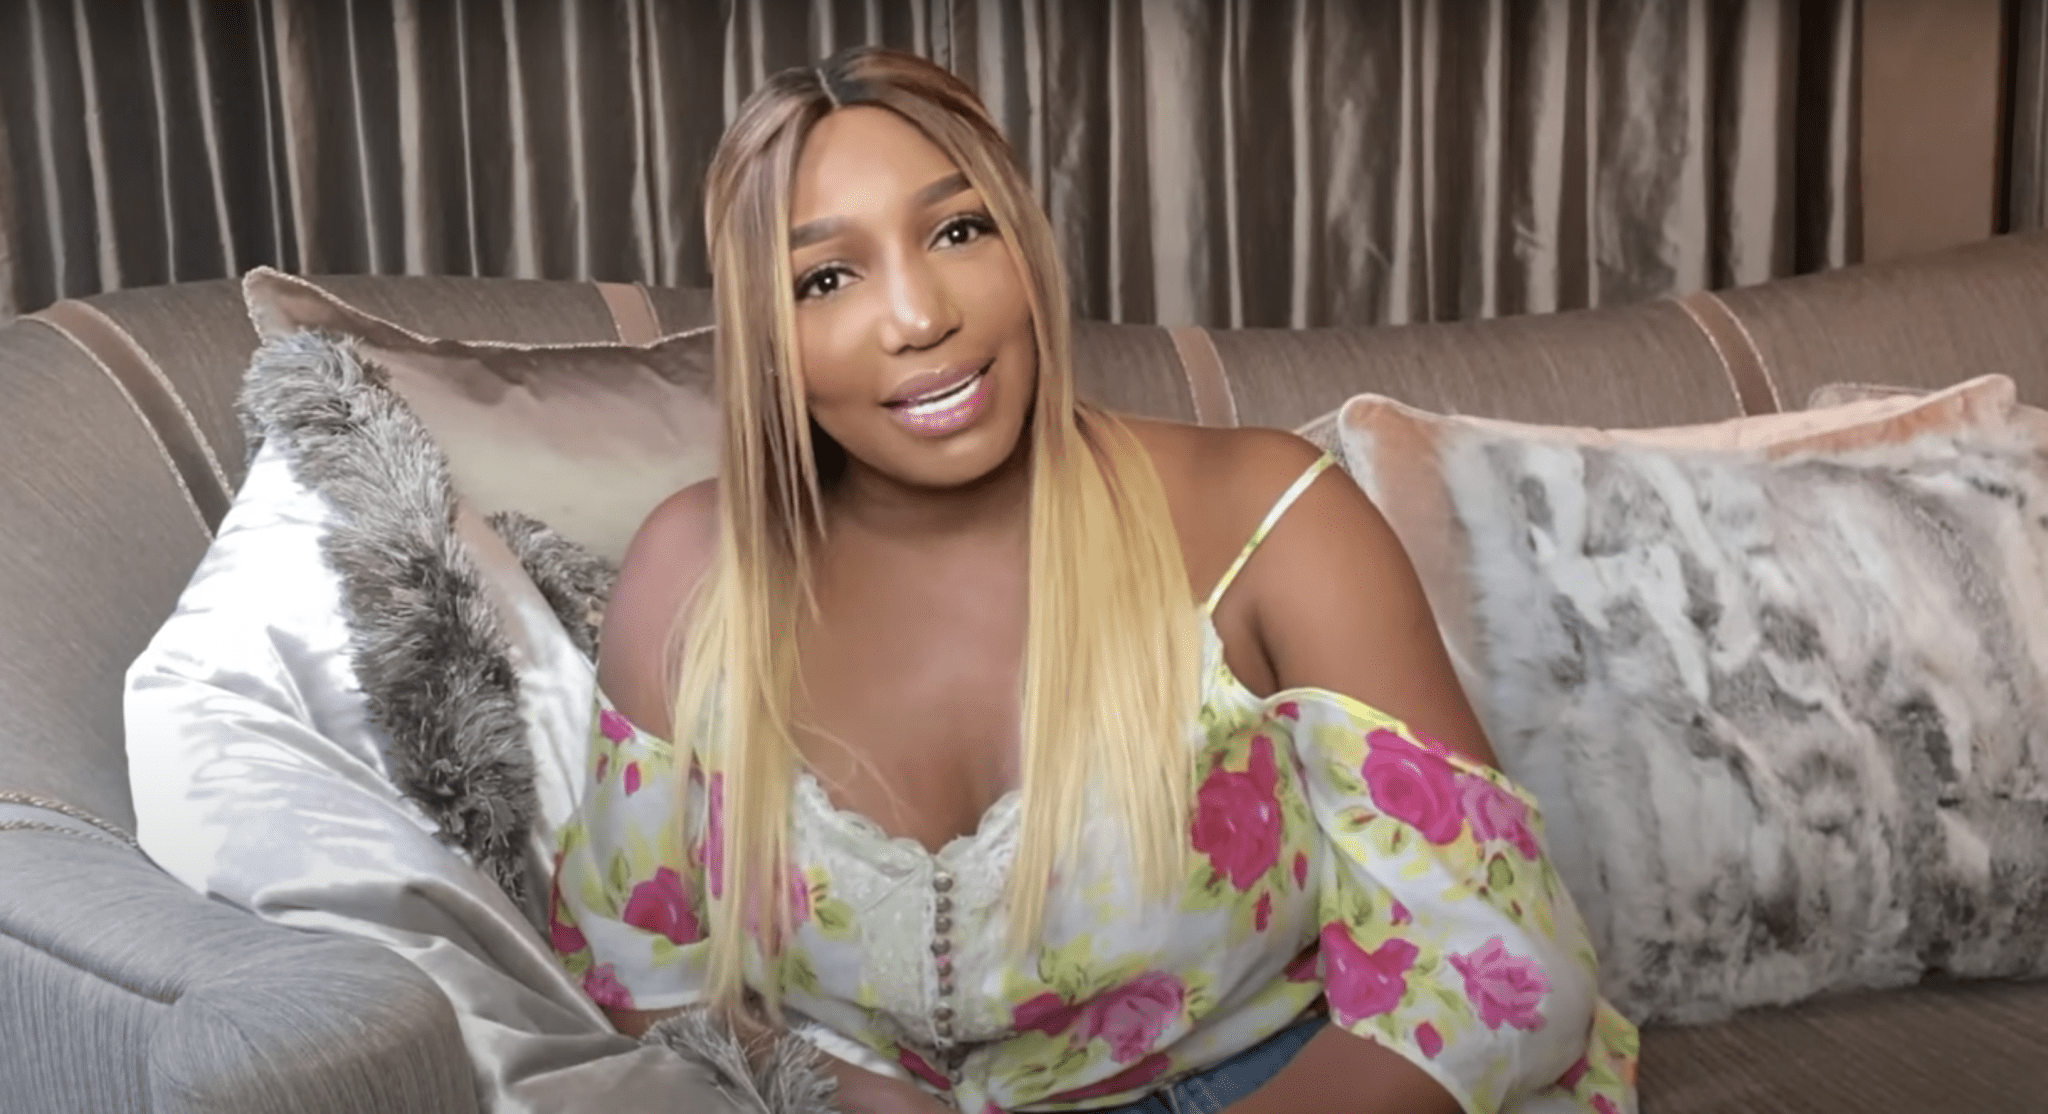 nene-leakes-is-grateful-to-everyone-who-touched-her-life